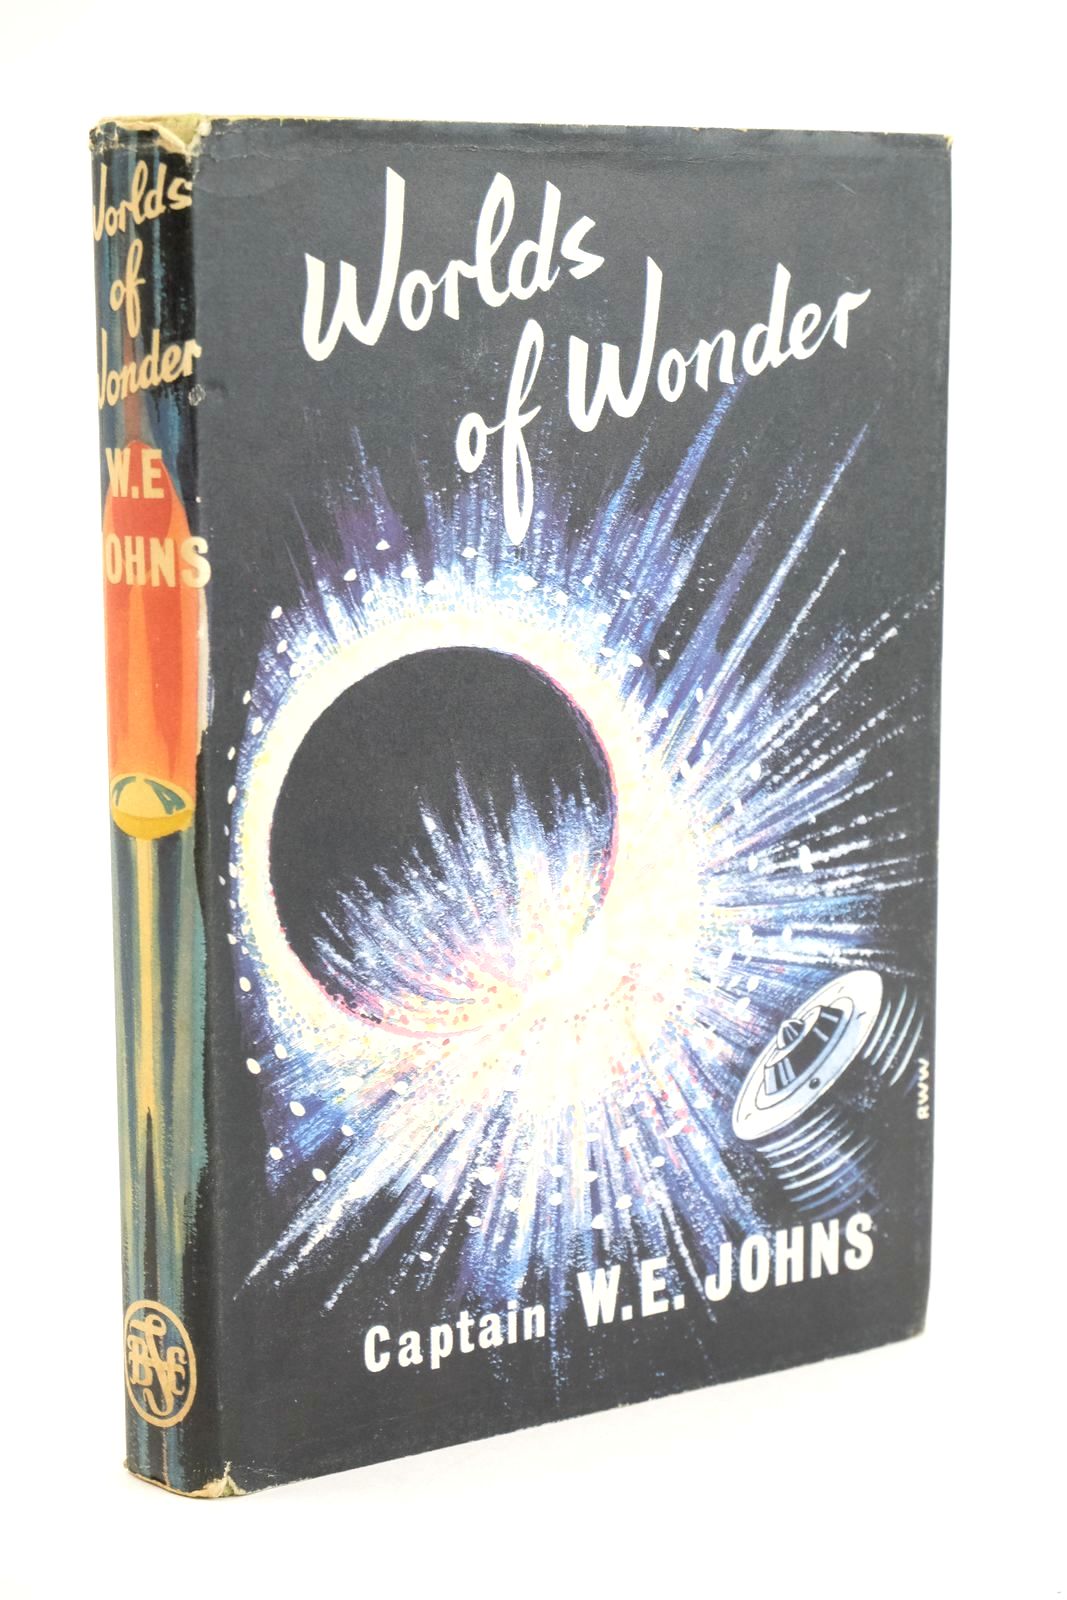 Photo of WORLDS OF WONDER- Stock Number: 1323662